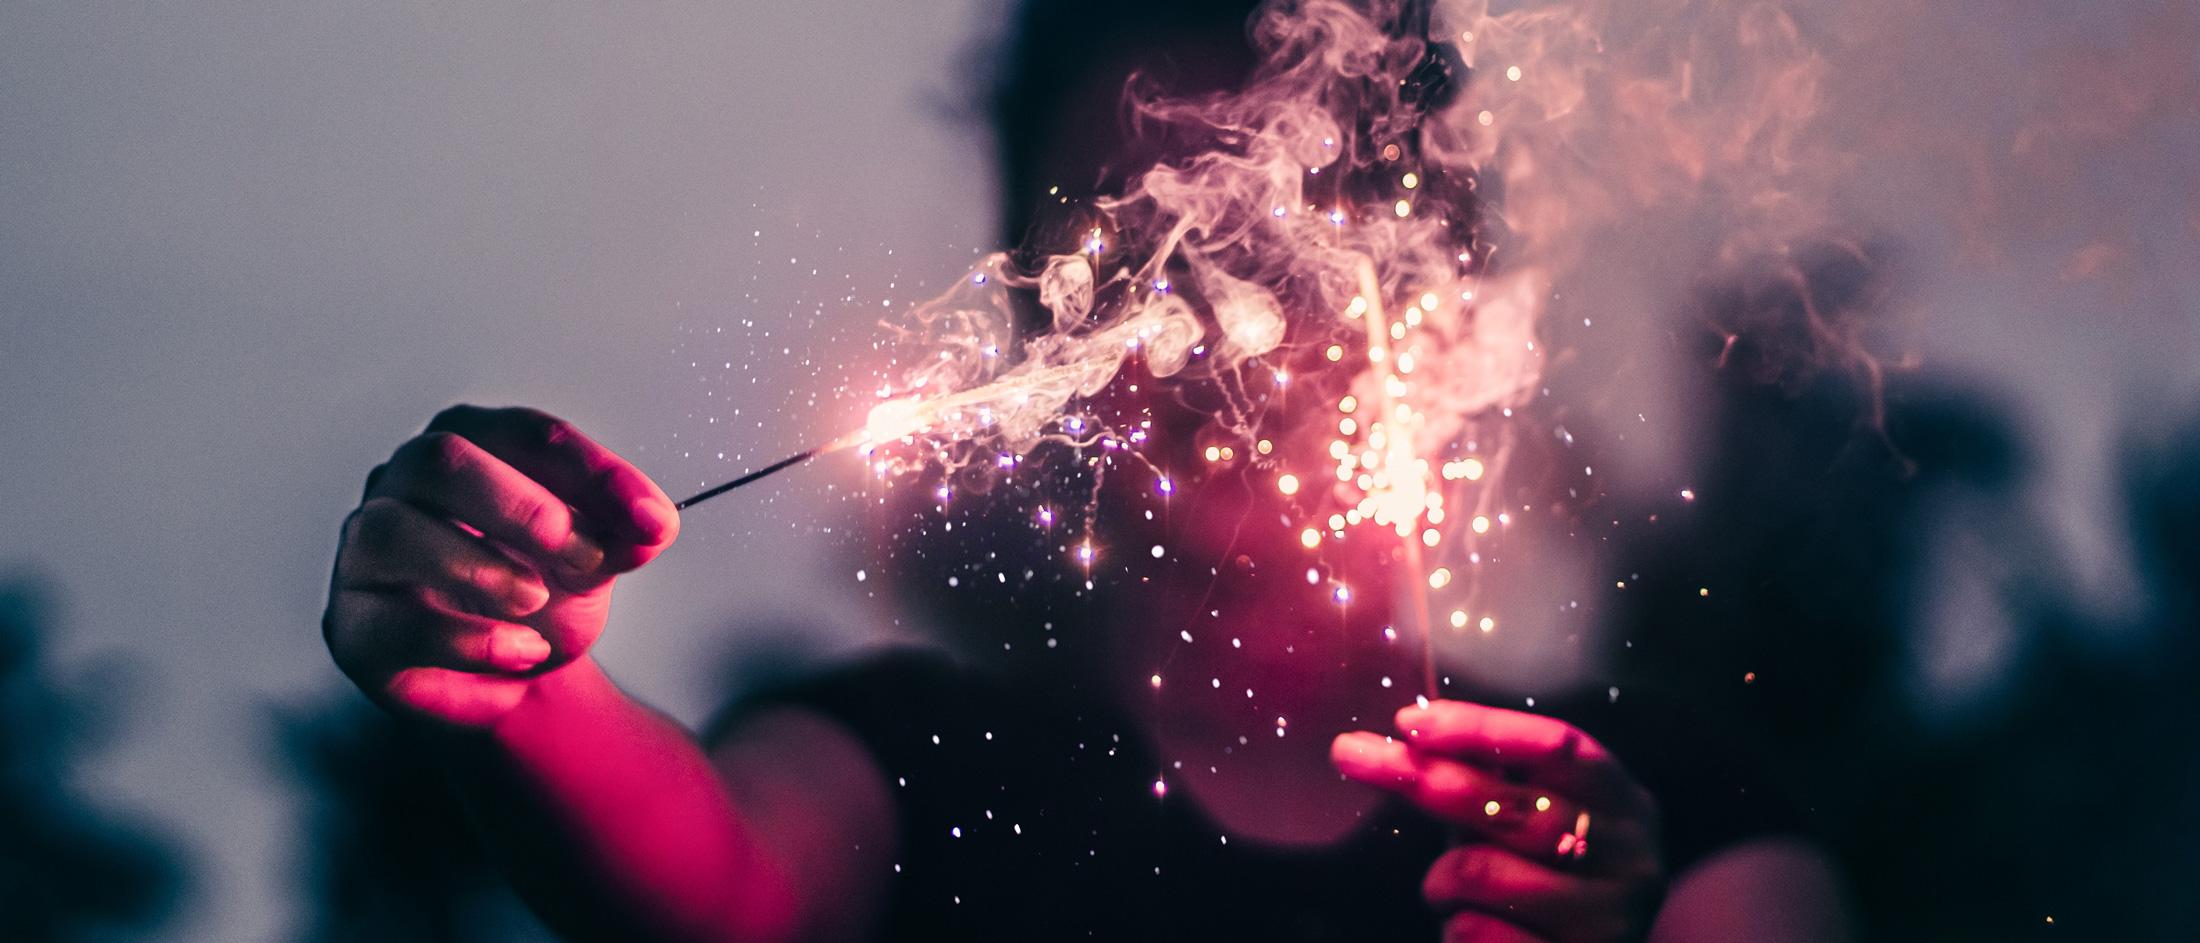 A person holding a sparkler with glowing red sparks and smoke